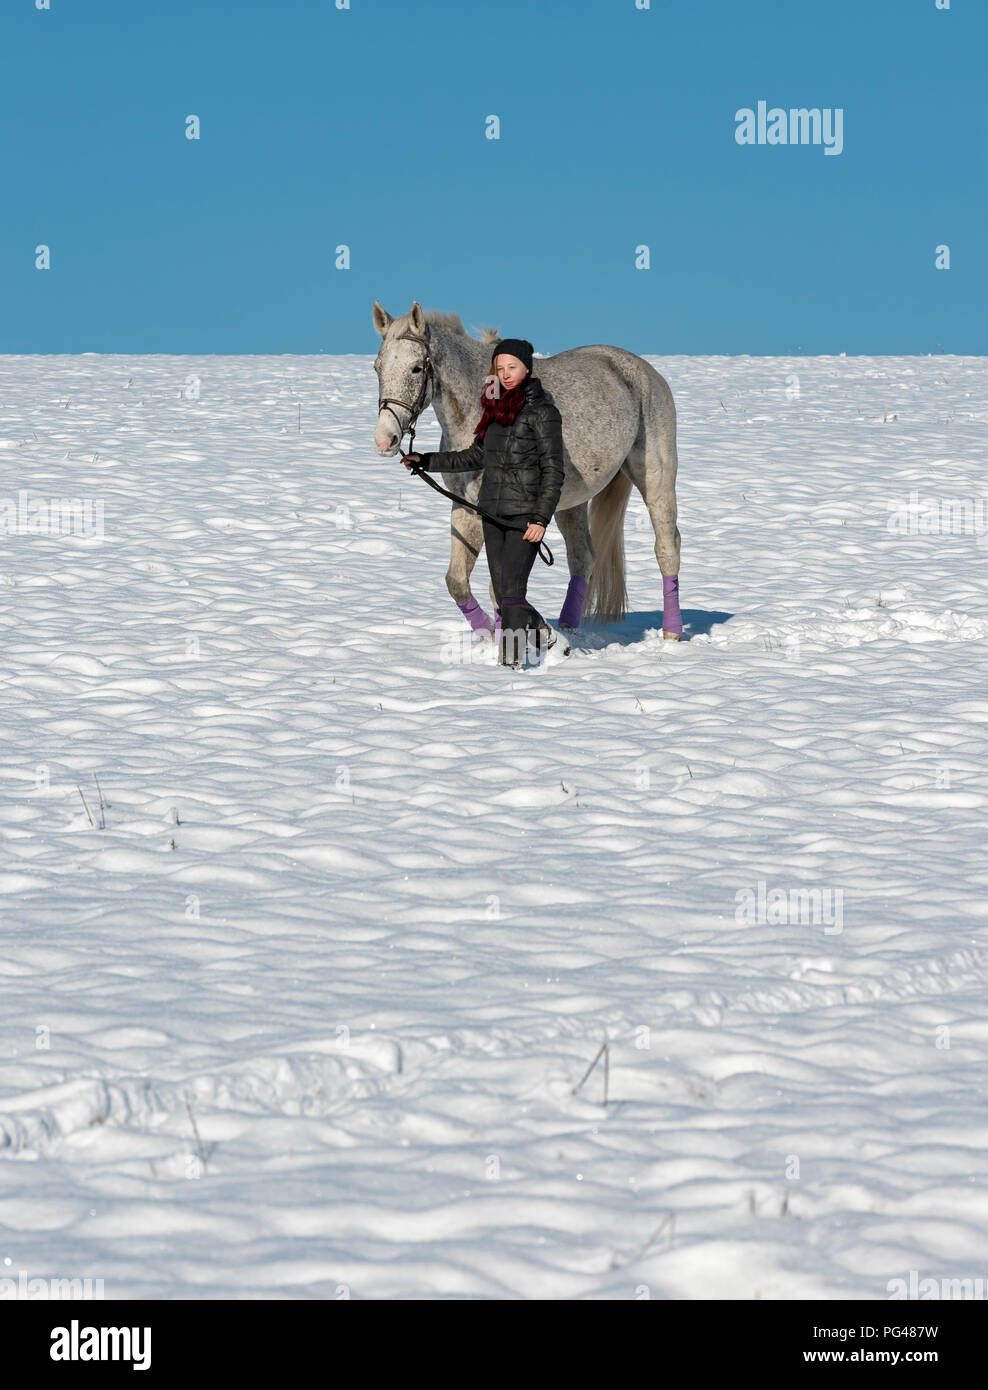 Teenage (14 years) girl with Czech warmblood horse on snow during winter Stock Photo